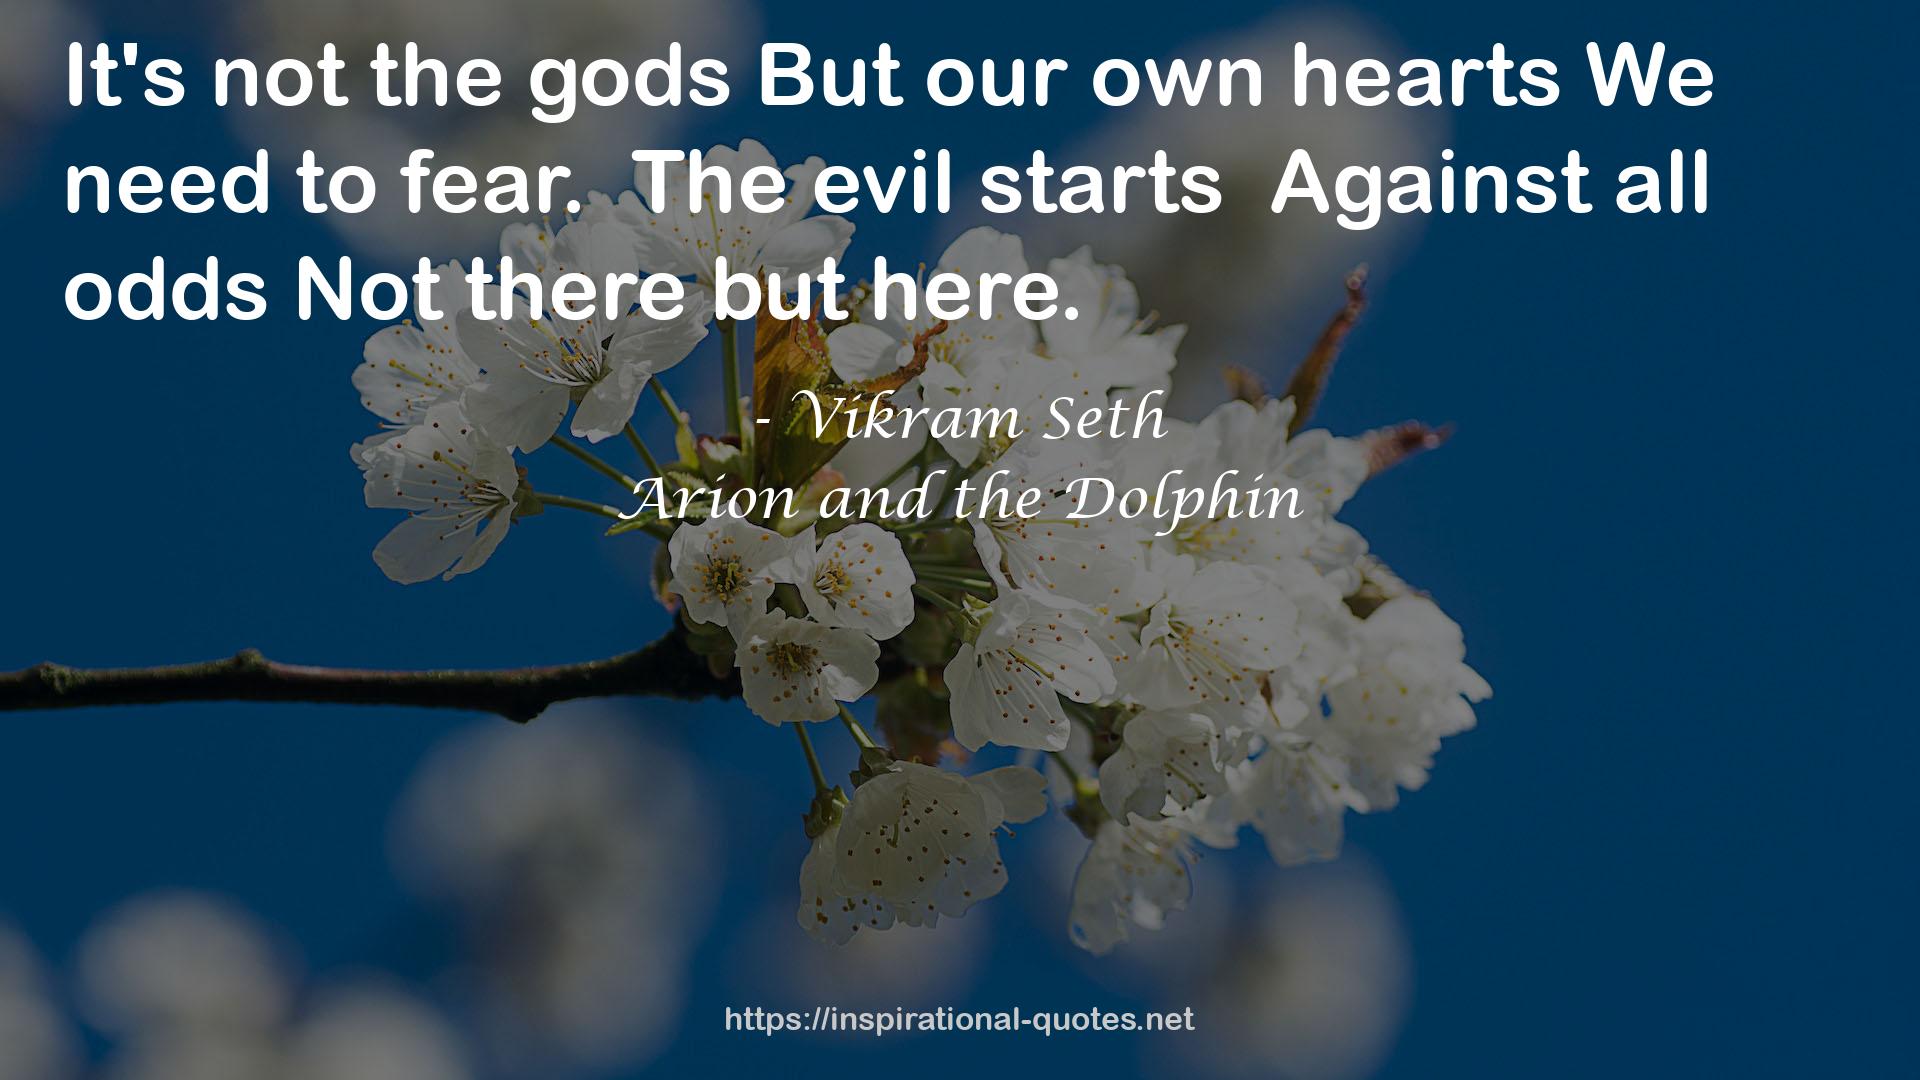 Arion and the Dolphin QUOTES